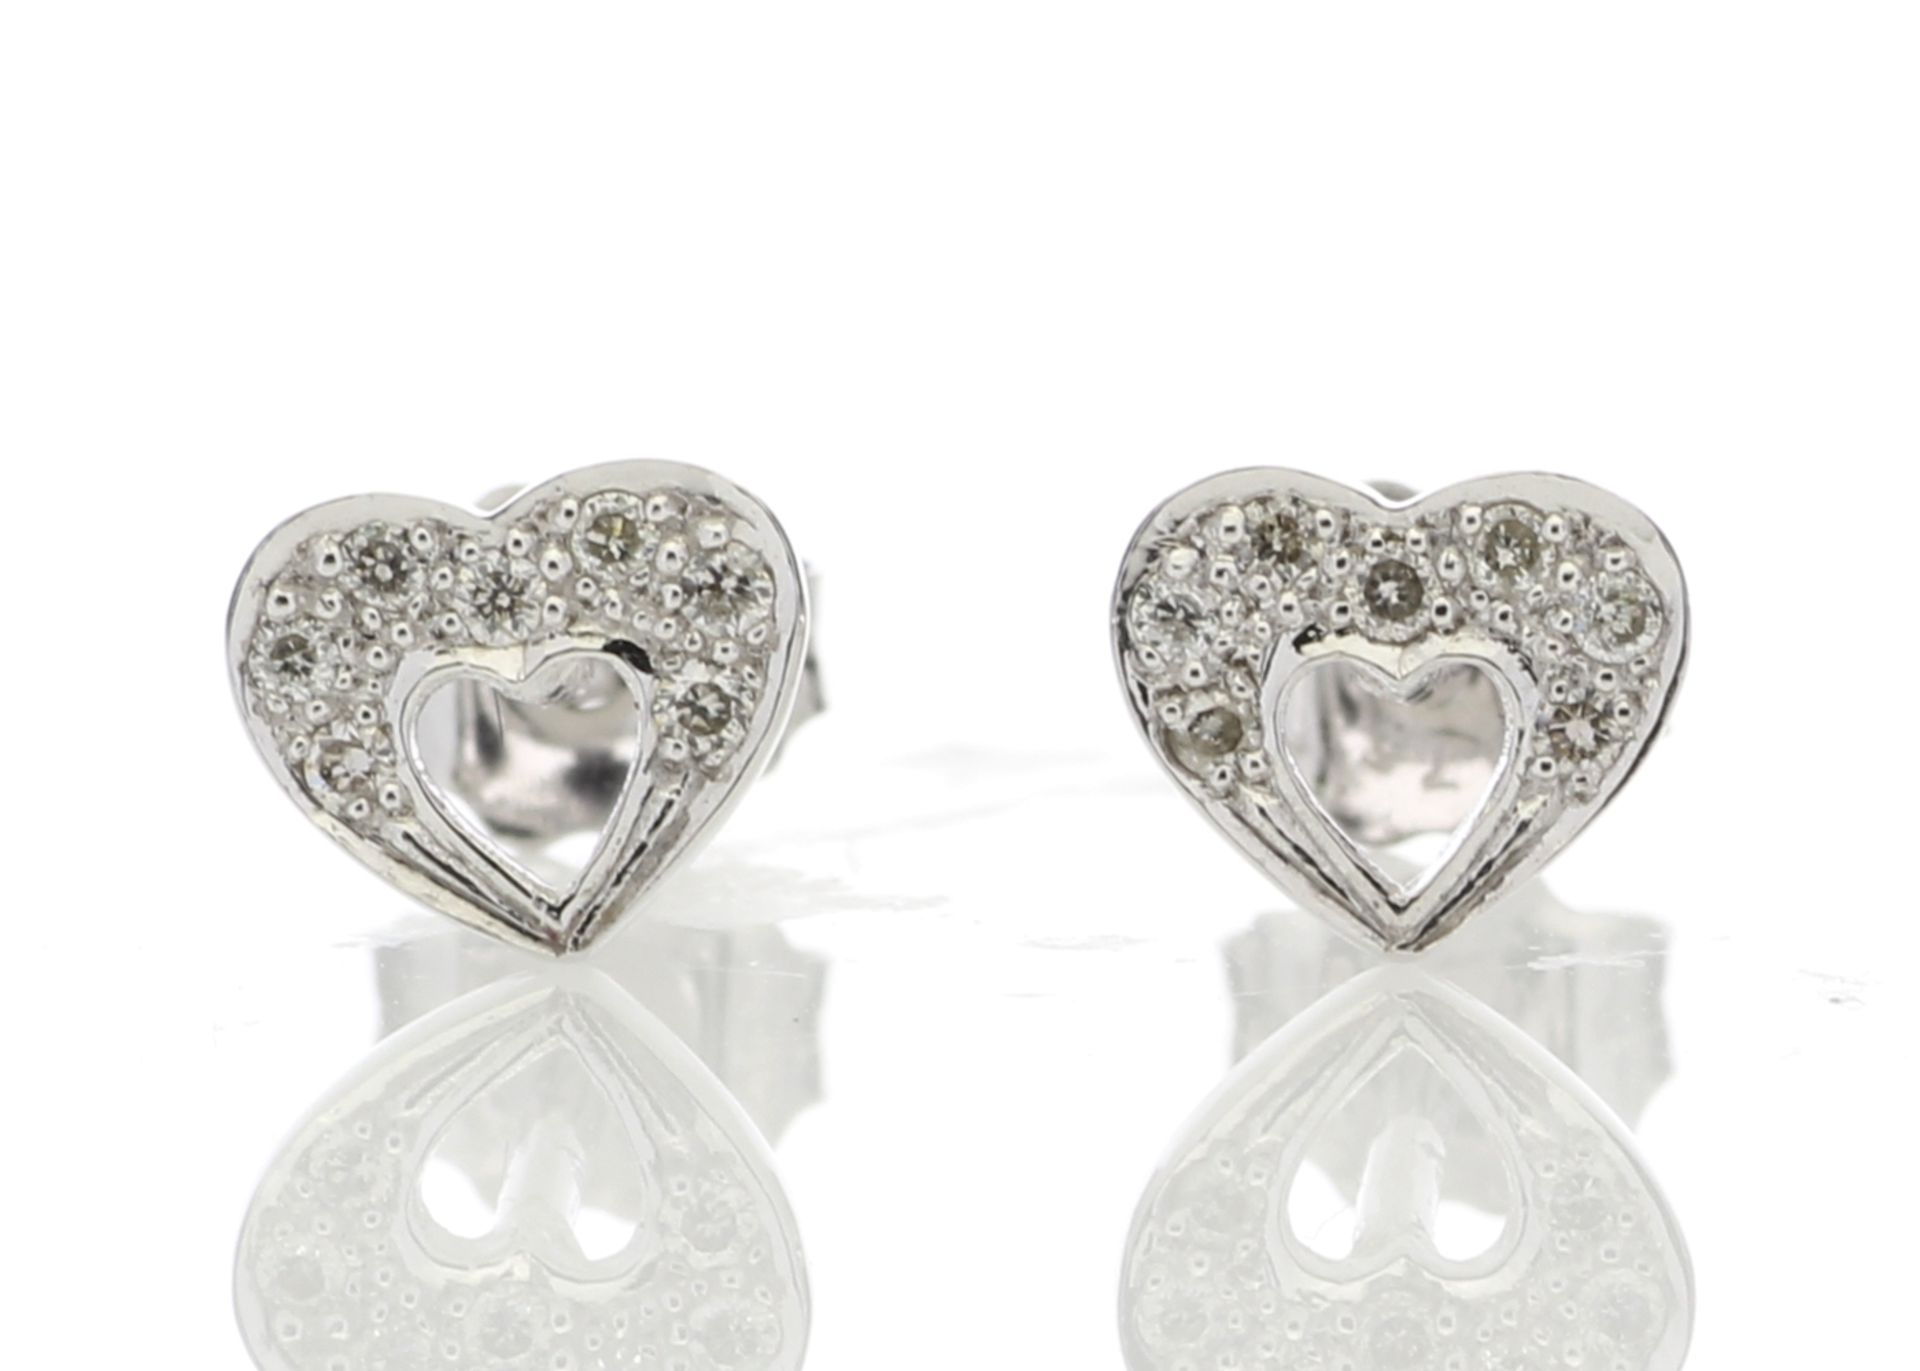 9ct White Gold Fancy Cluster Diamond Earrings - Valued By IDI £1,855.00 - Seven round brilliant